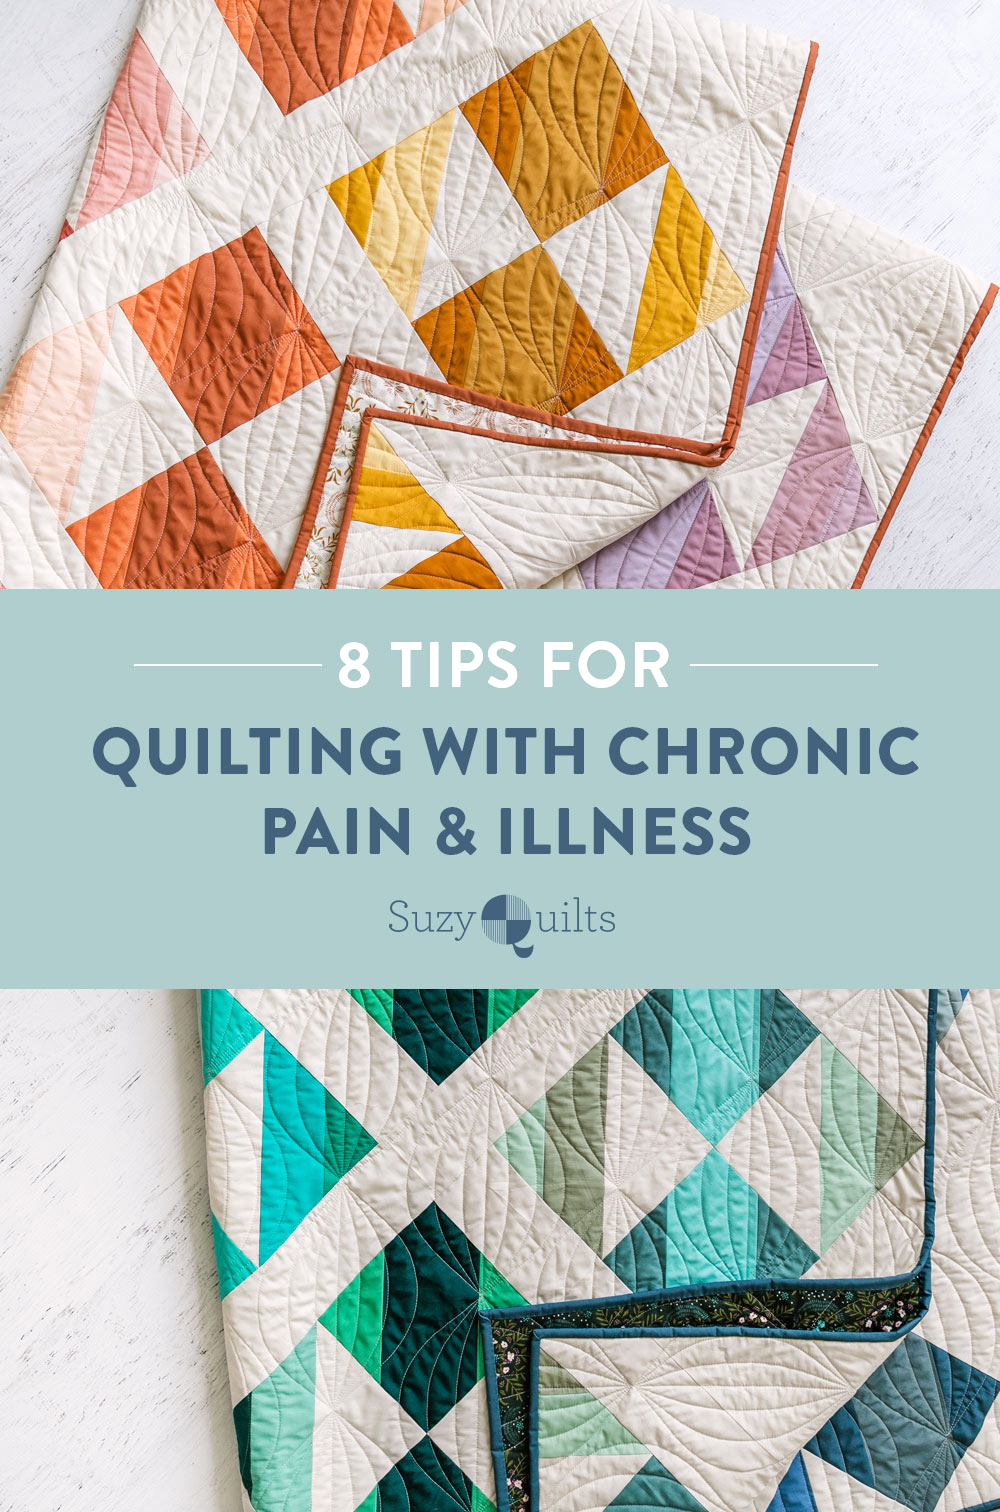 8 tips for quilting with chronic pain and illness! suzyquilts.com #quilting #sewing